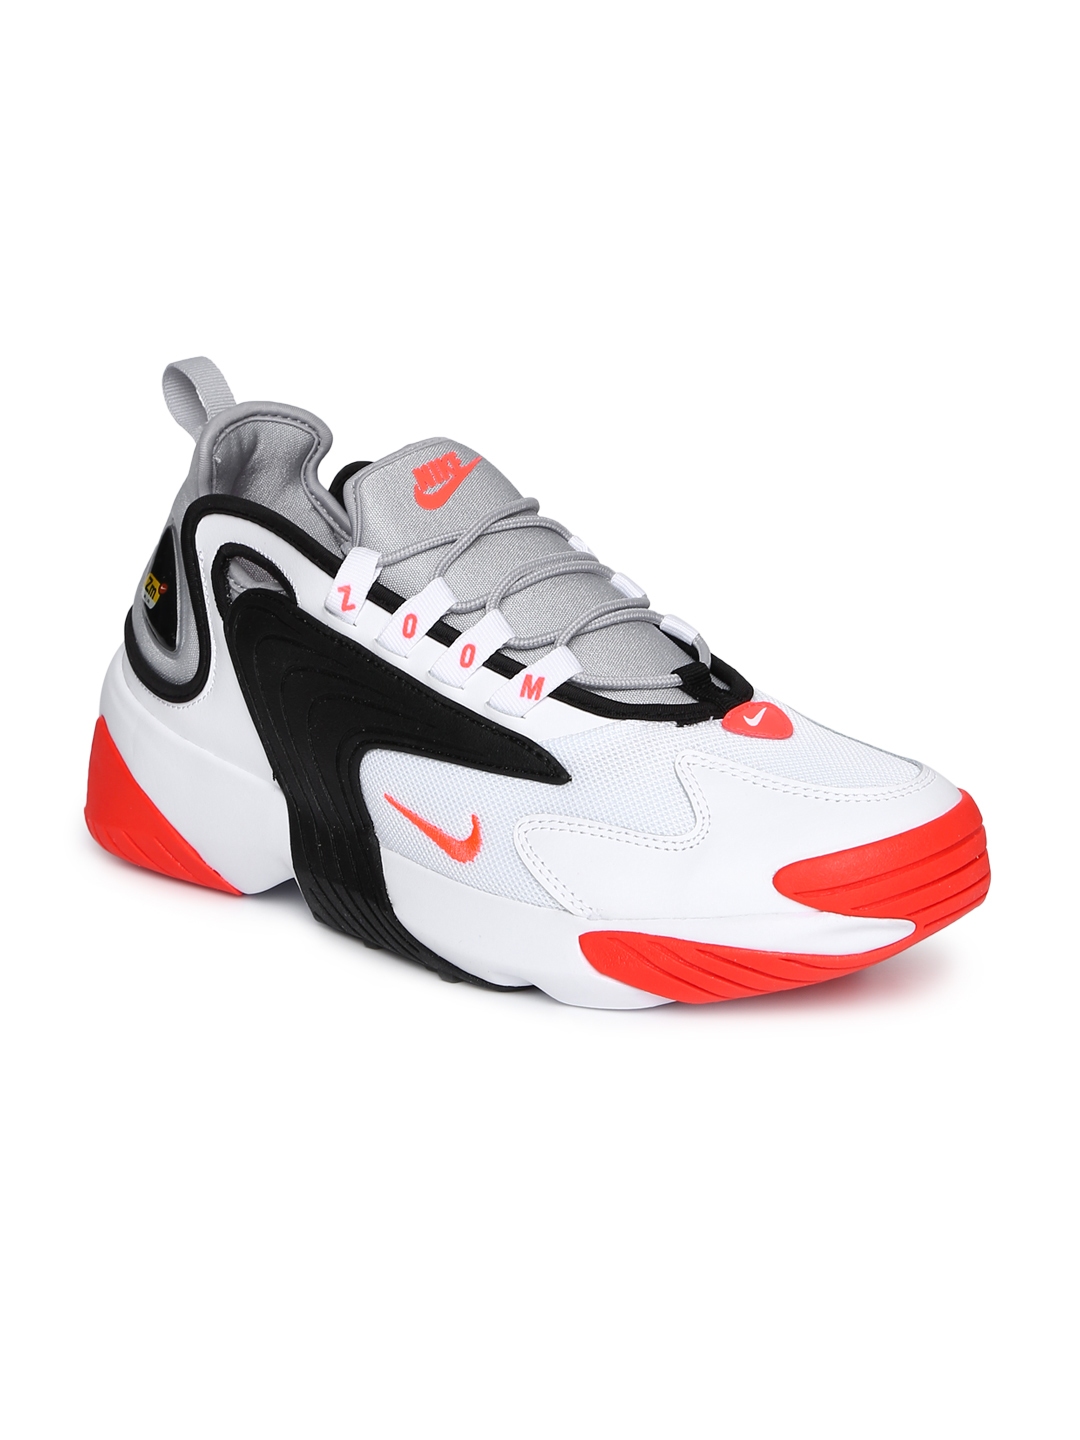 nike zoom shoes price in india 2019